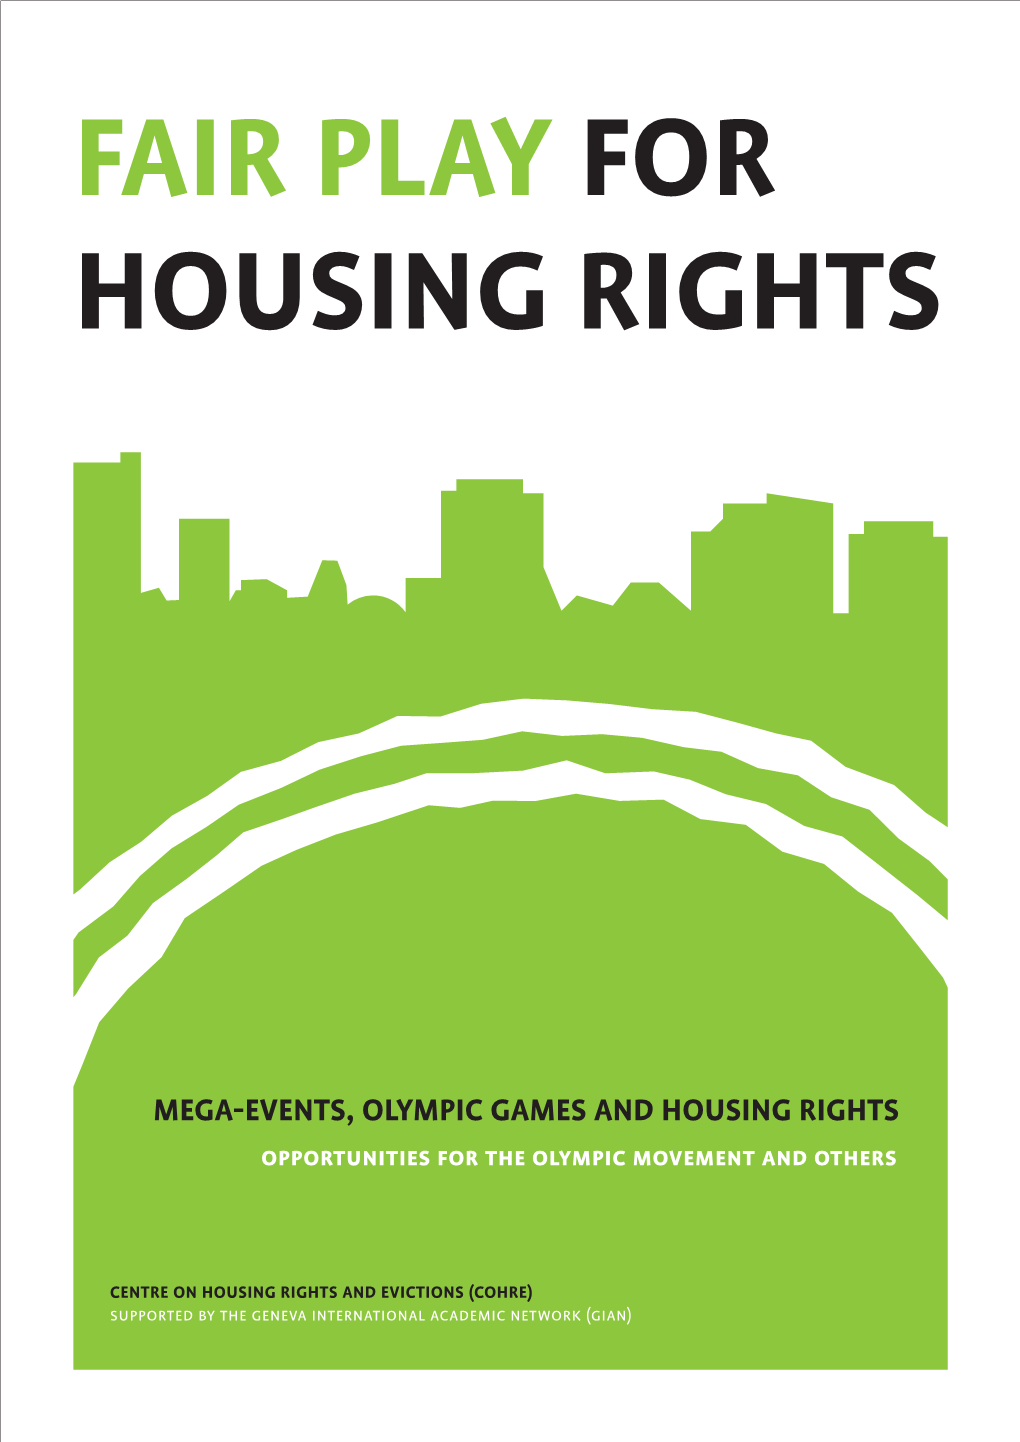 Mega-Events, Olympic Games and Housing Rights Opportunities for the Olympic Movement and Others